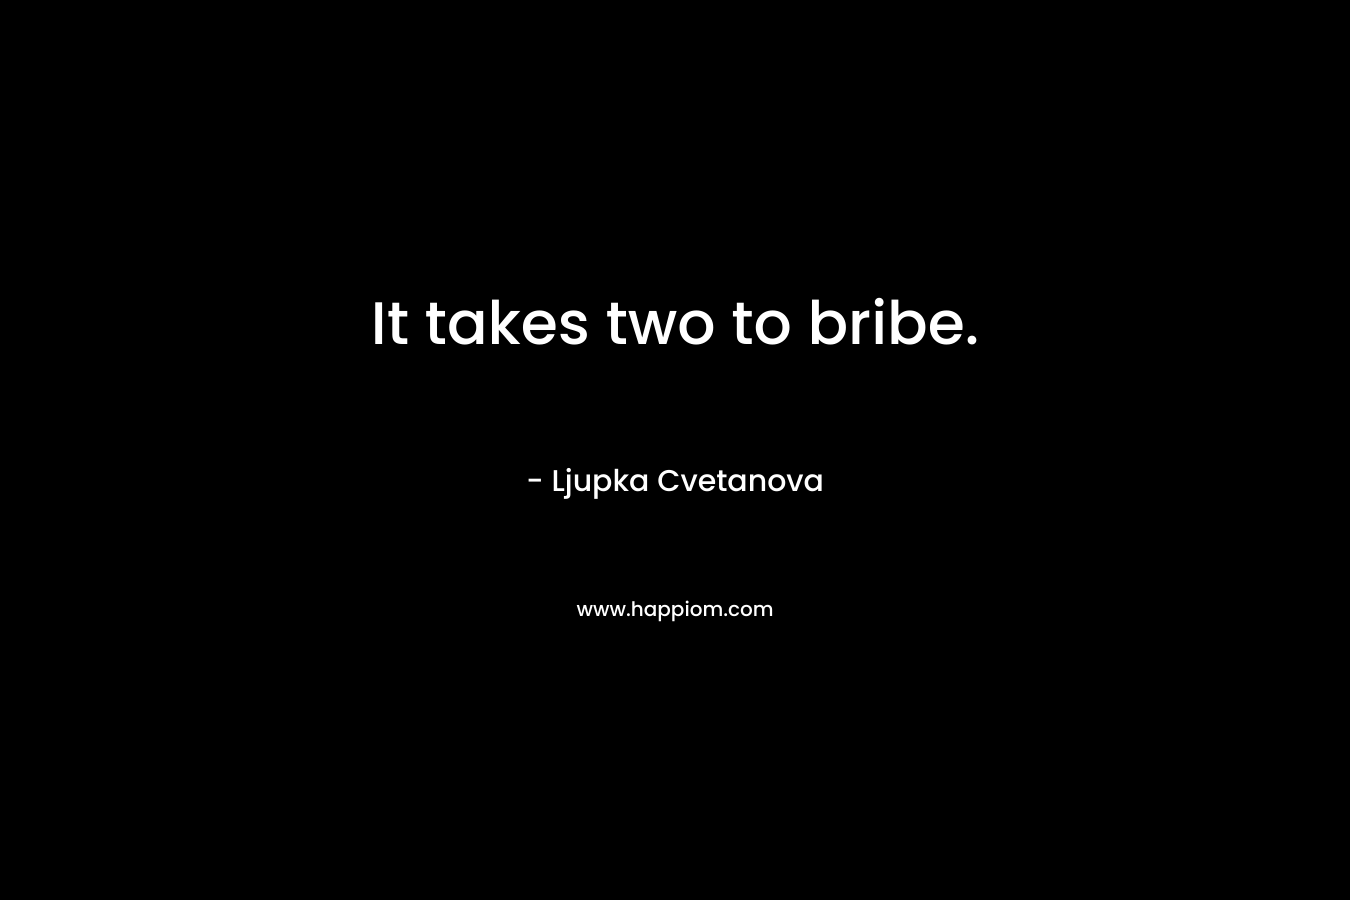 It takes two to bribe.